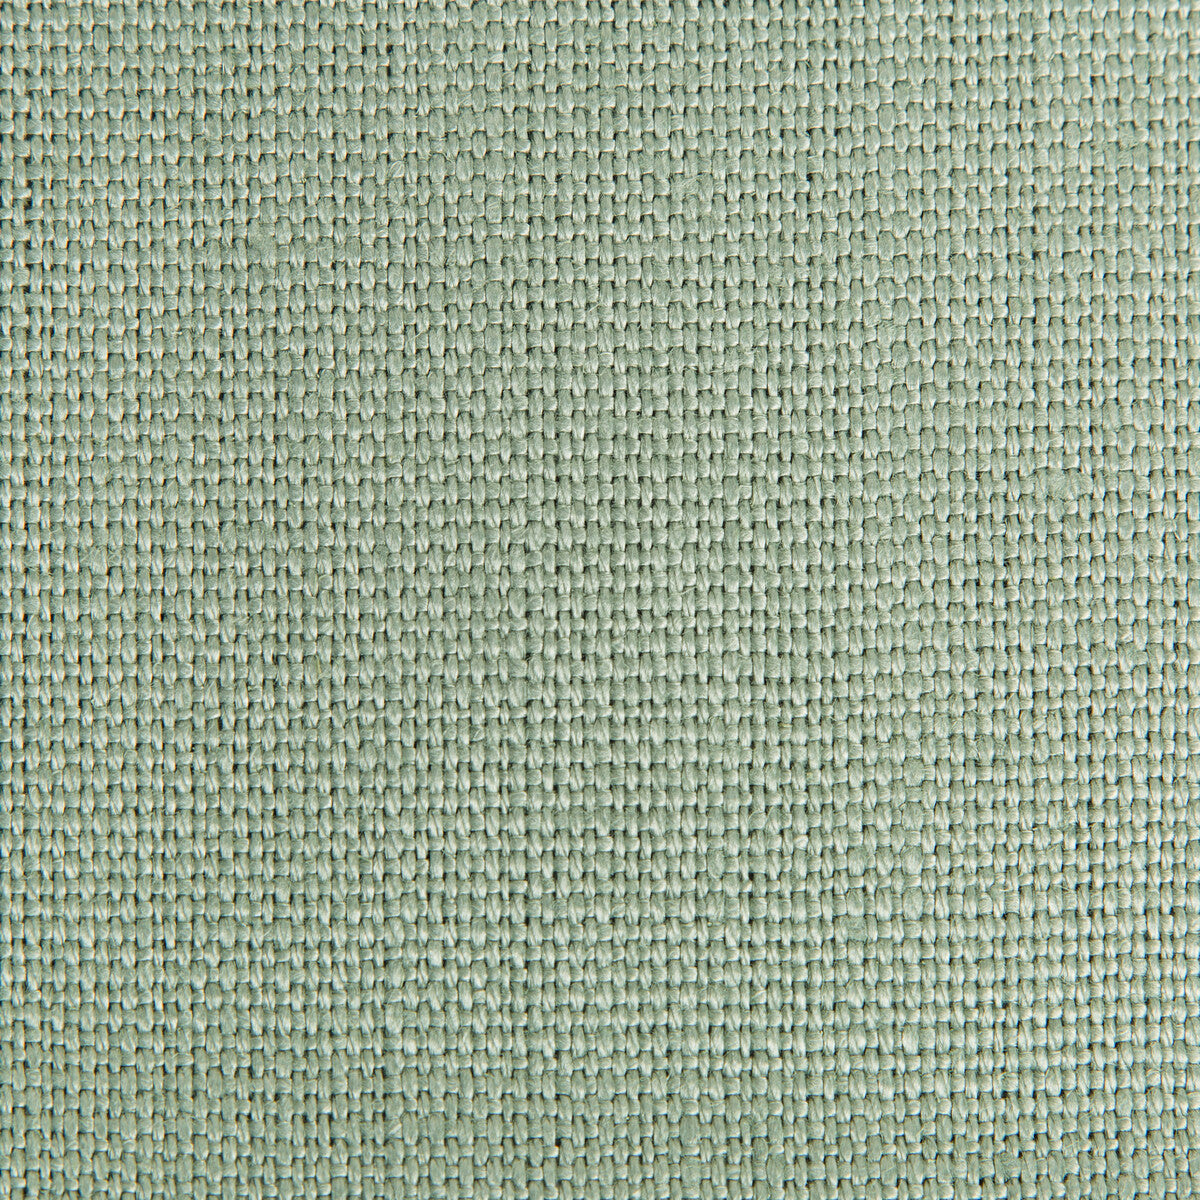 Hampton Linen fabric in mist color - pattern 2012171.15.0 - by Lee Jofa in the Colour Complements II collection